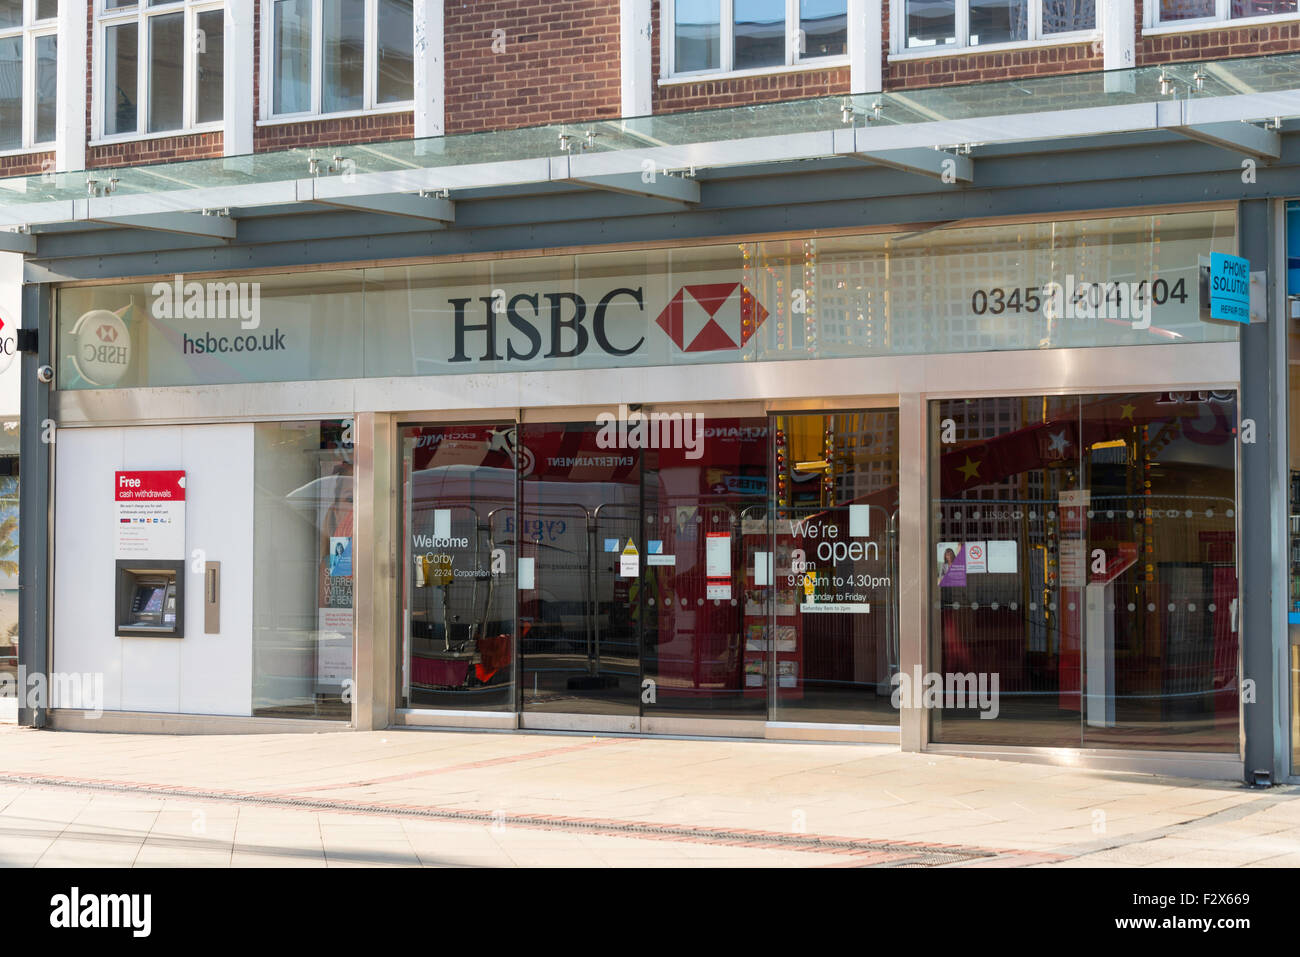 La Banque HSBC, Willow Place Shopping Centre, Corby, Northamptonshire, Angleterre, Royaume-Uni Banque D'Images